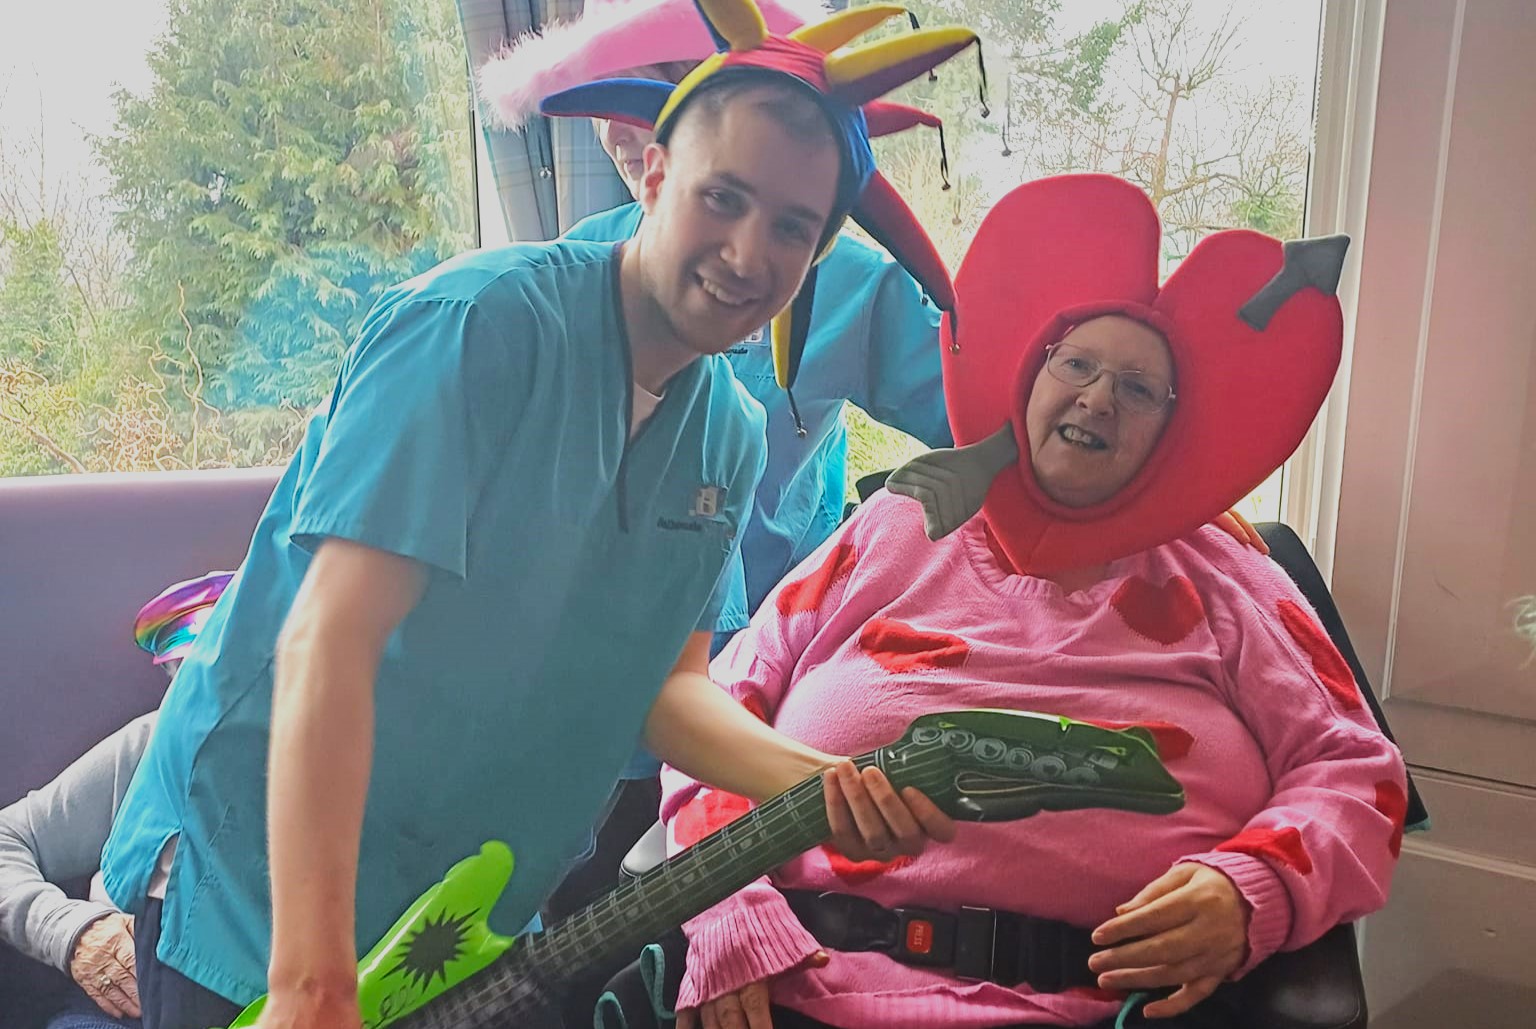 CArer with blow up guitar and resident with Heart hat